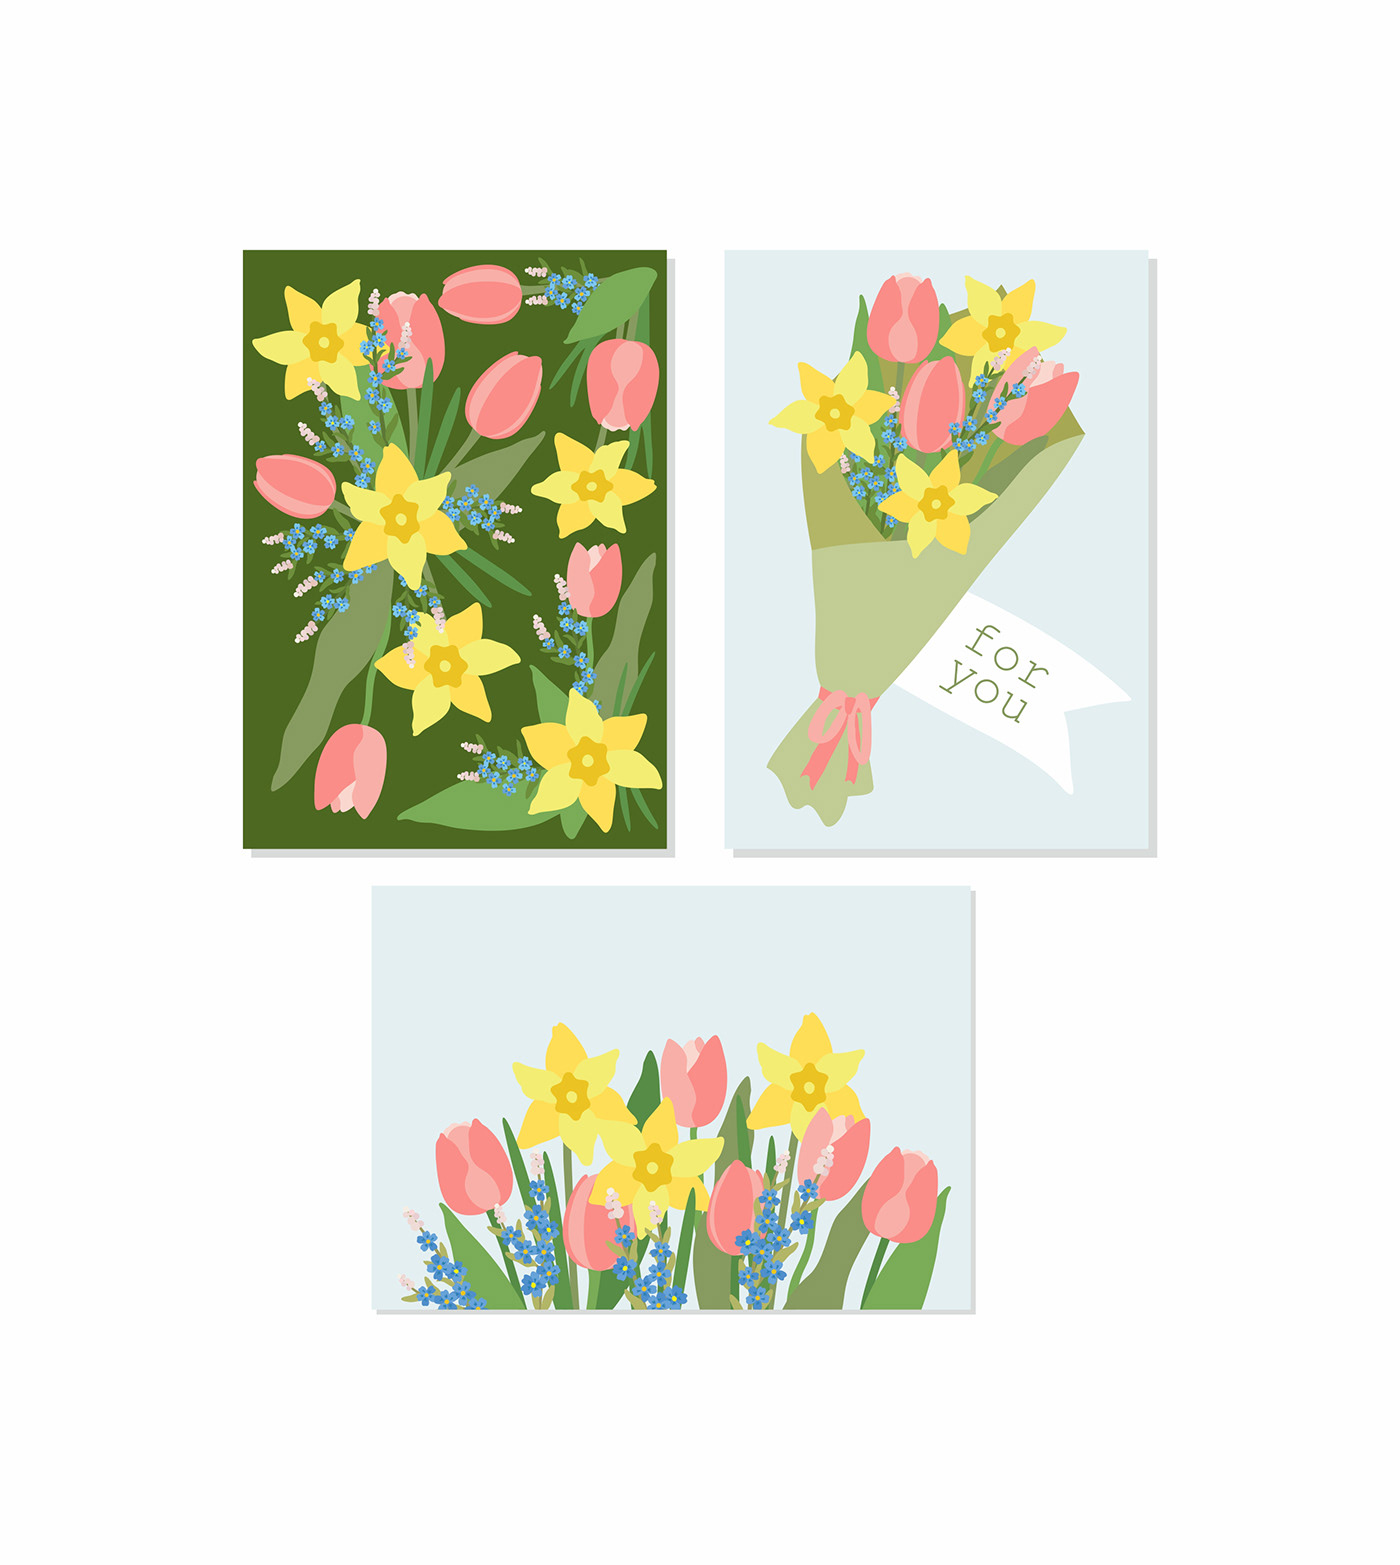 daffodils Flowers forget-me-nots march postcards spring throwaway tulips